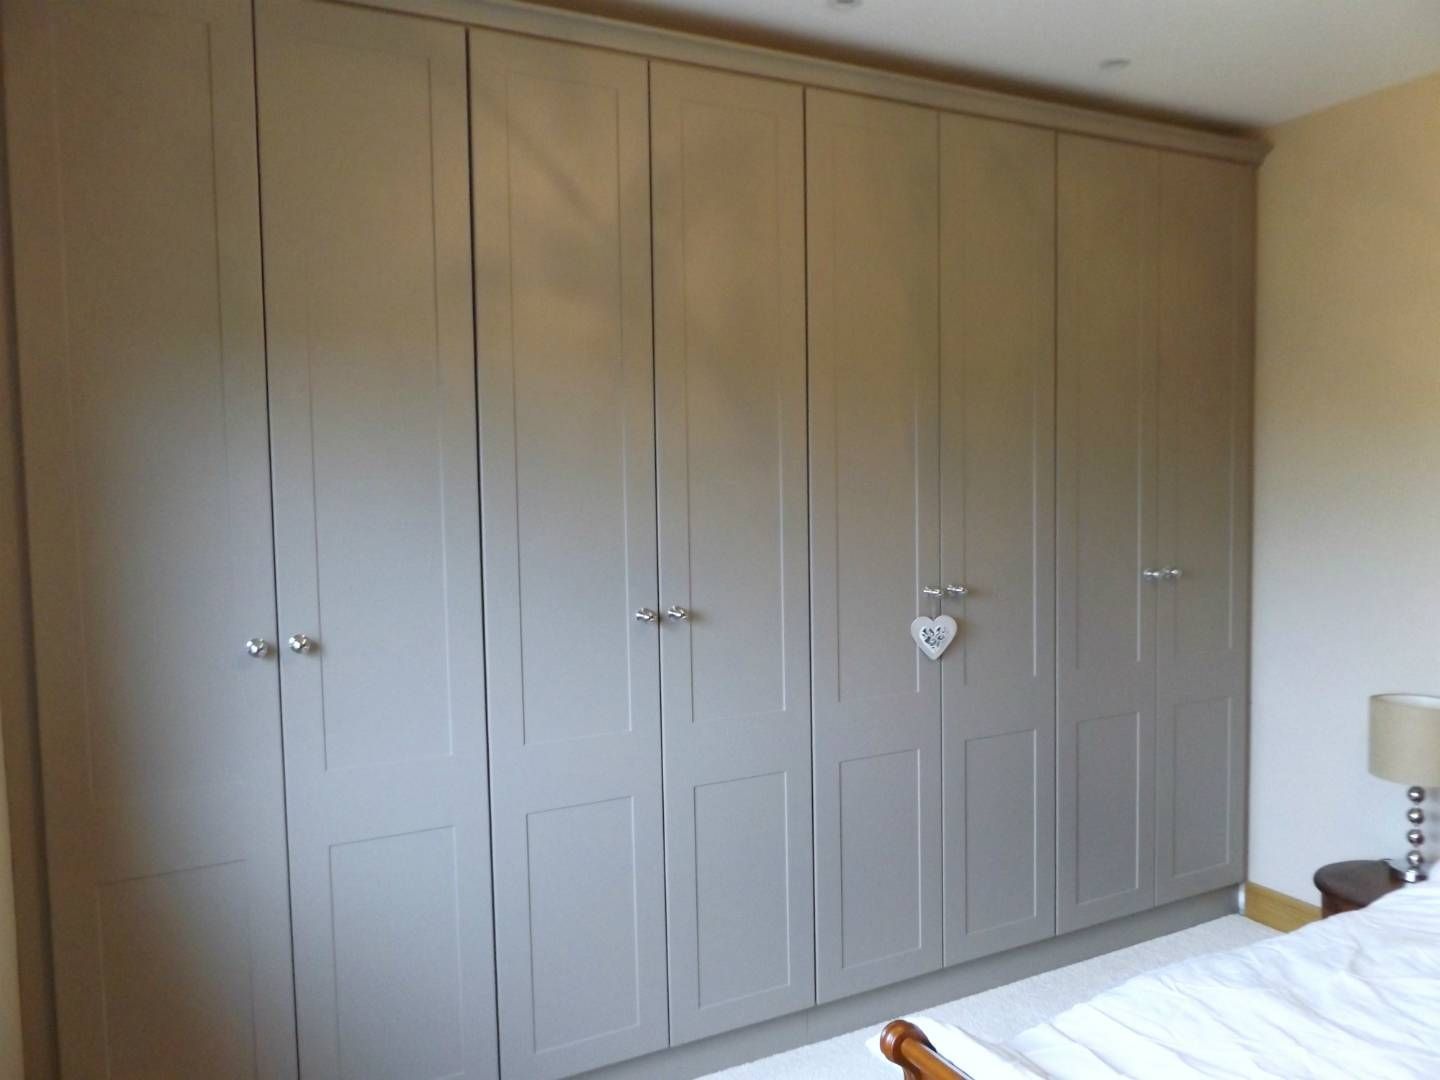 Wardrobe Special Offer | Newhaven Kitchens & Bedrooms With Regard To Grey Wardrobes (View 9 of 15)